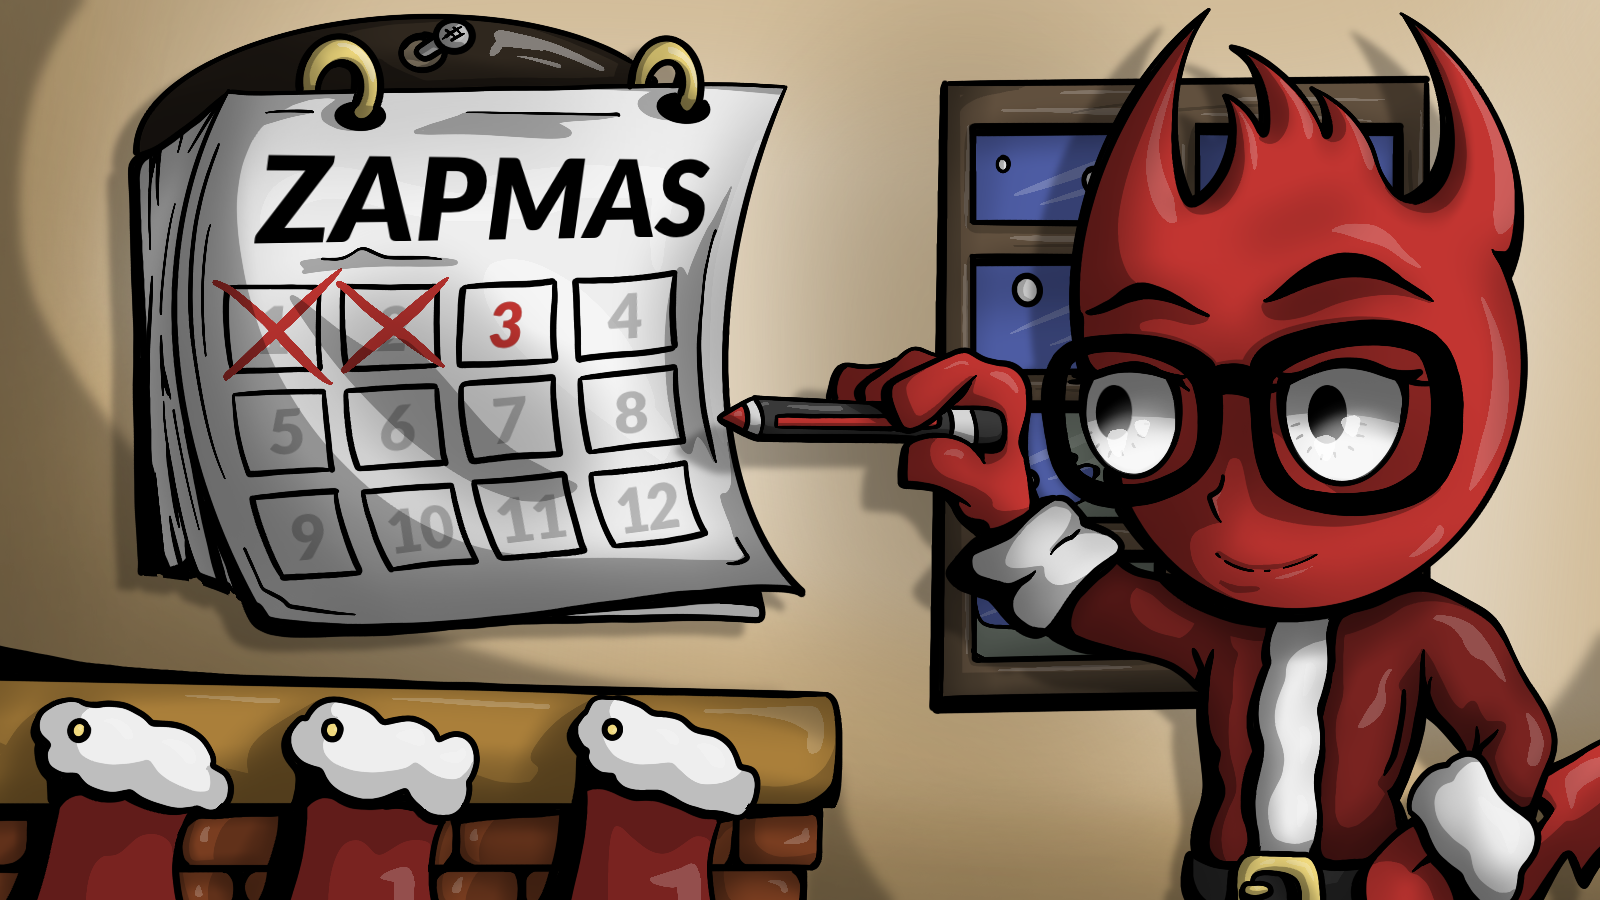 Twelve Days of ZAPmas - Day 3 - CYA (Cover Your Auth)